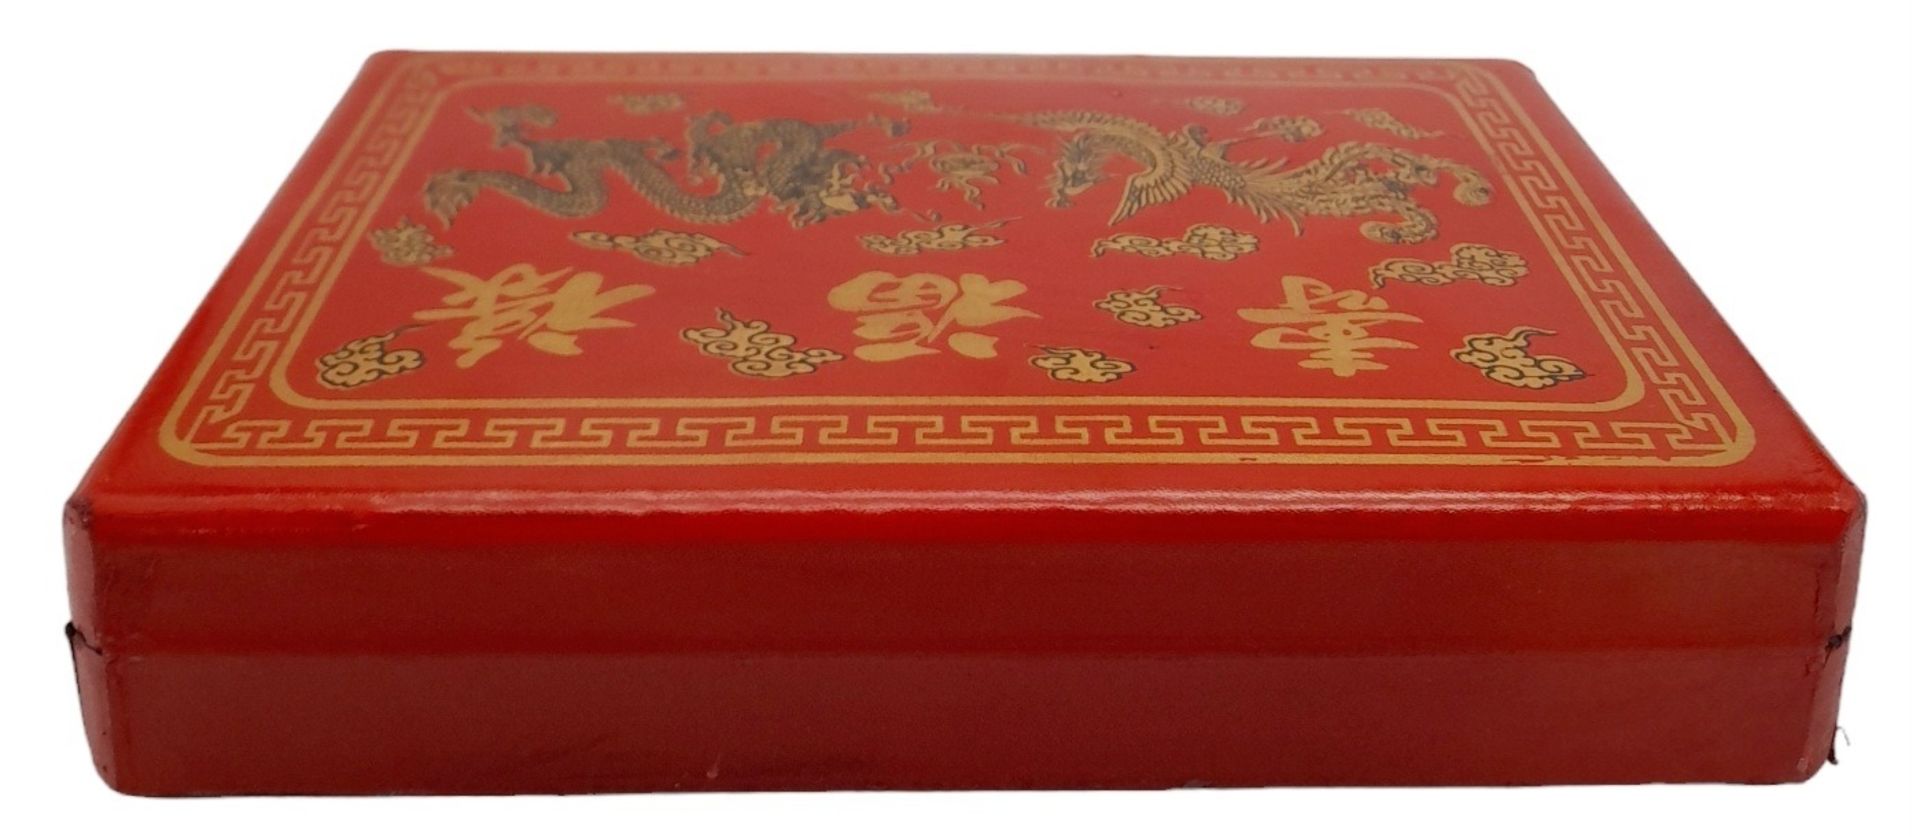 A Mah Jongg Chinese Dice Game in a Small Decorative Travelling Case. In excellent condition. - Bild 3 aus 7